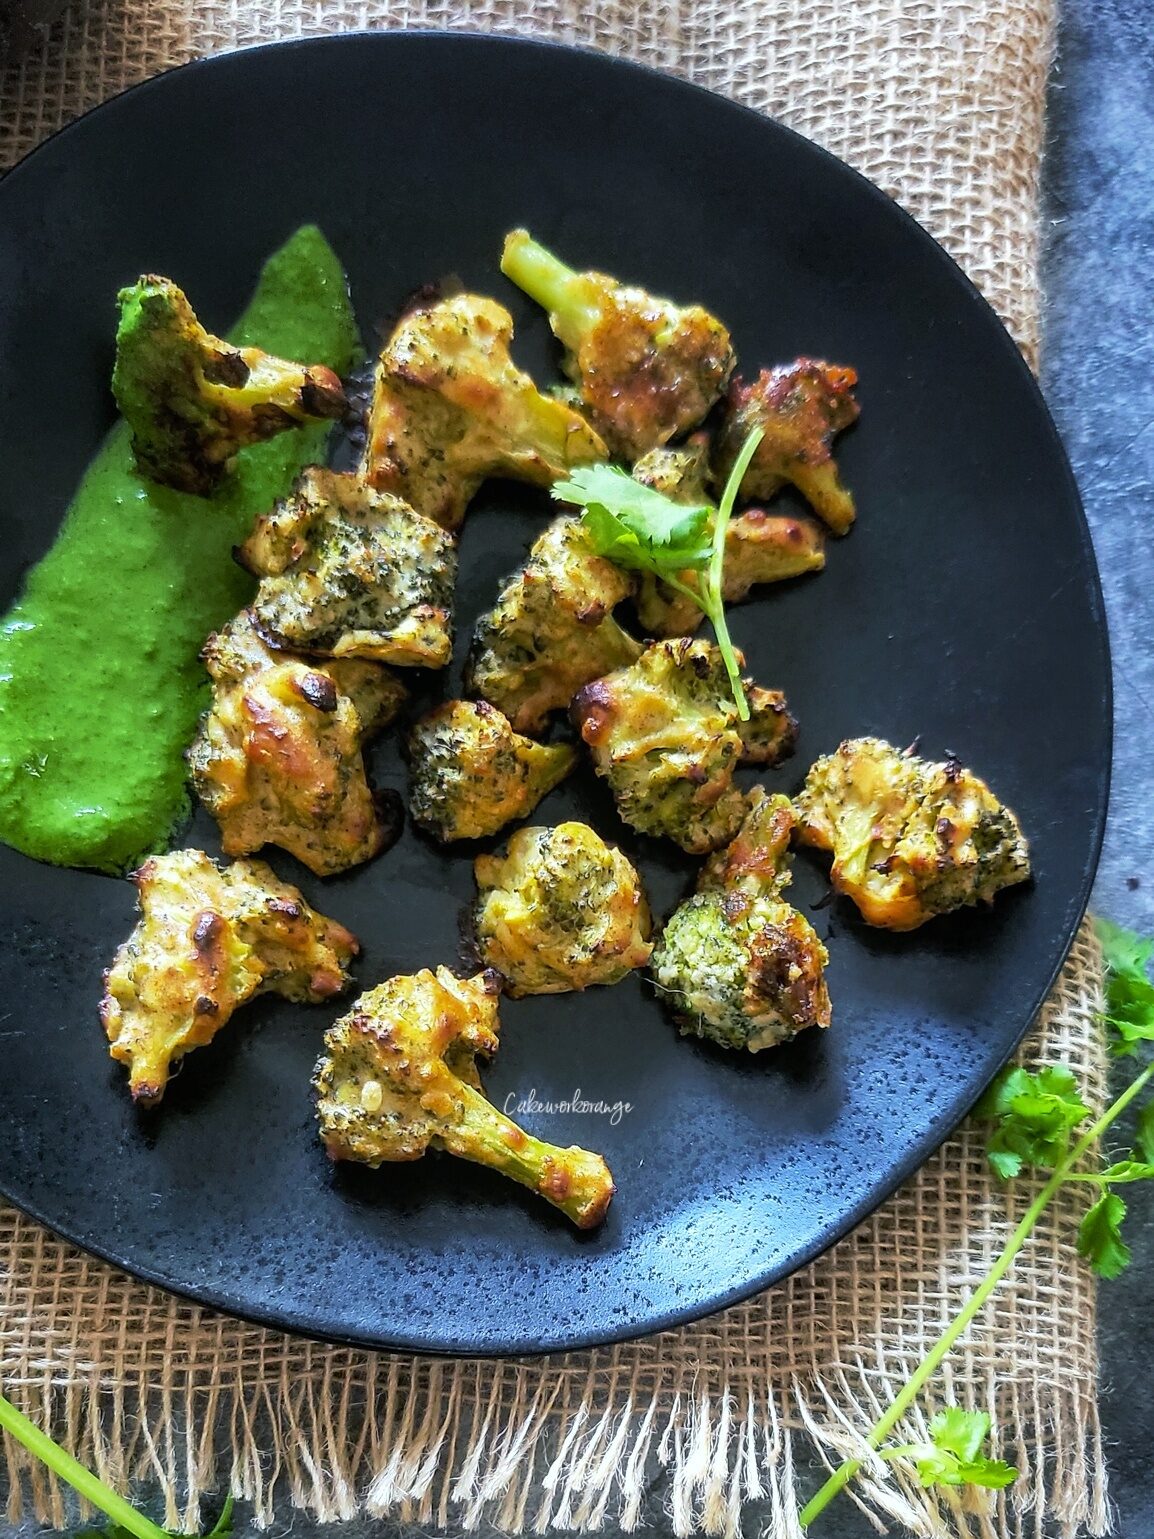 Delicious Malai Broccoli served with green chutney. 